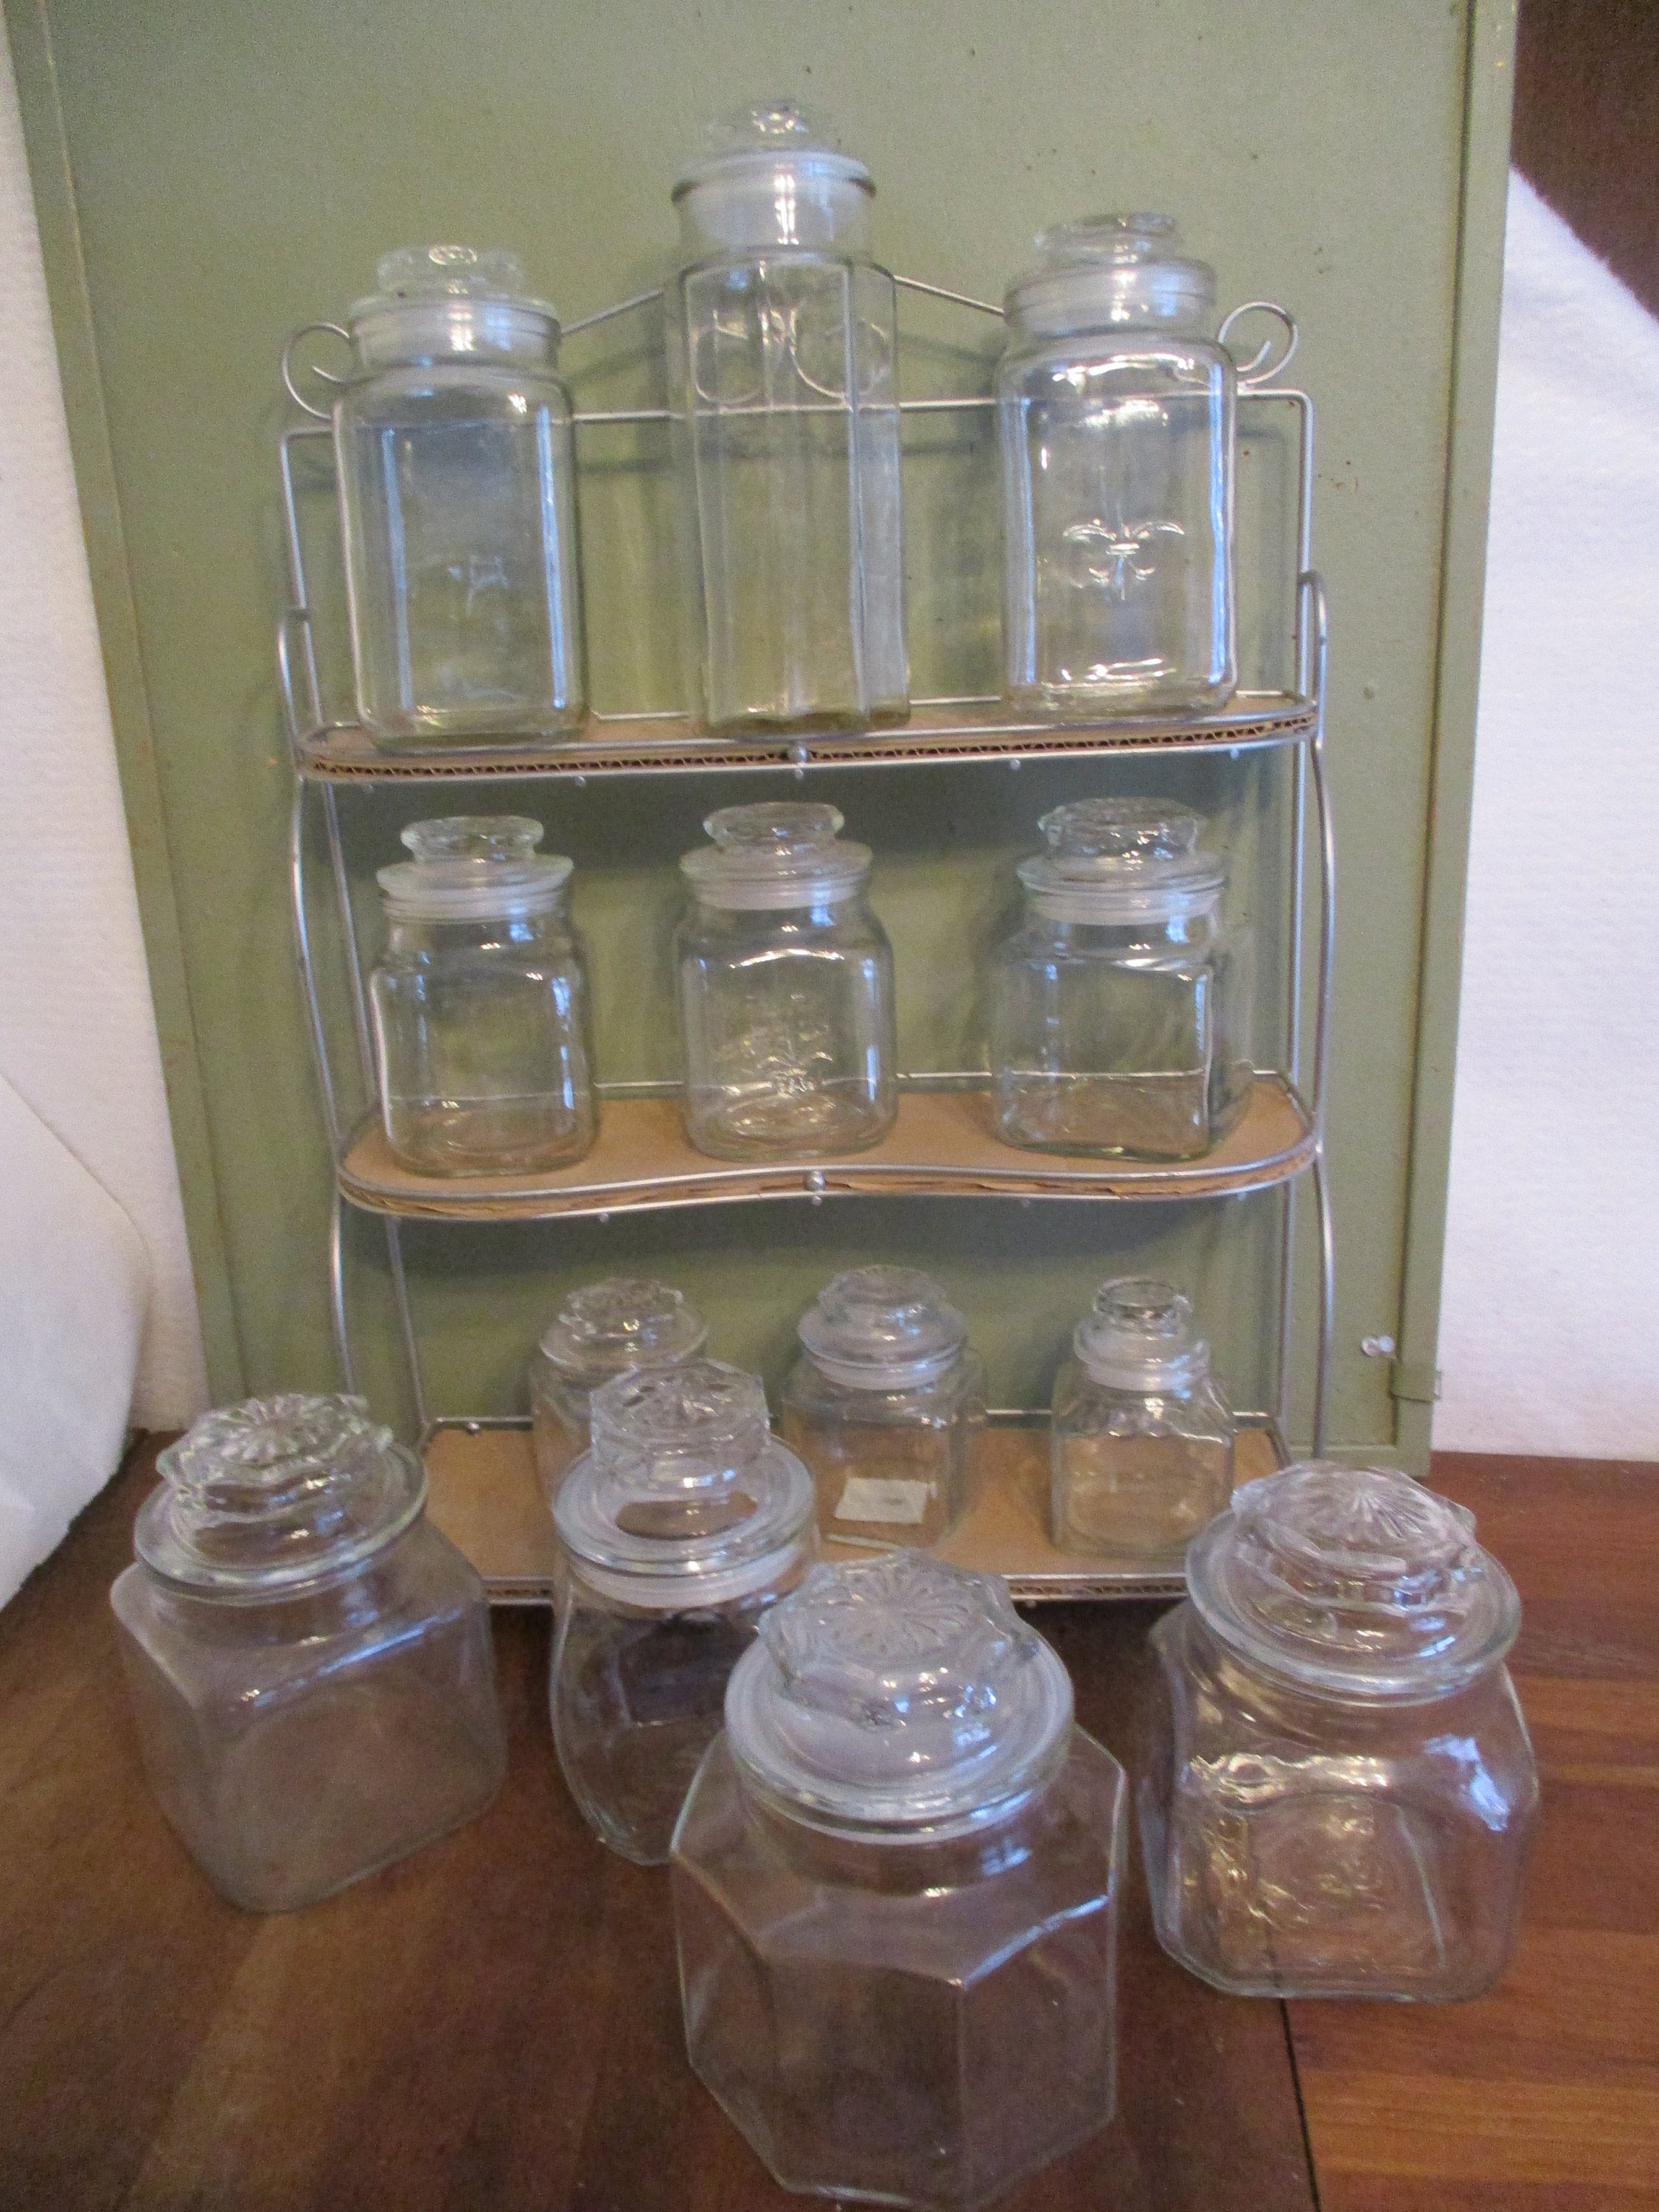 Anchor Hocking Stackable Square Glass Canisters